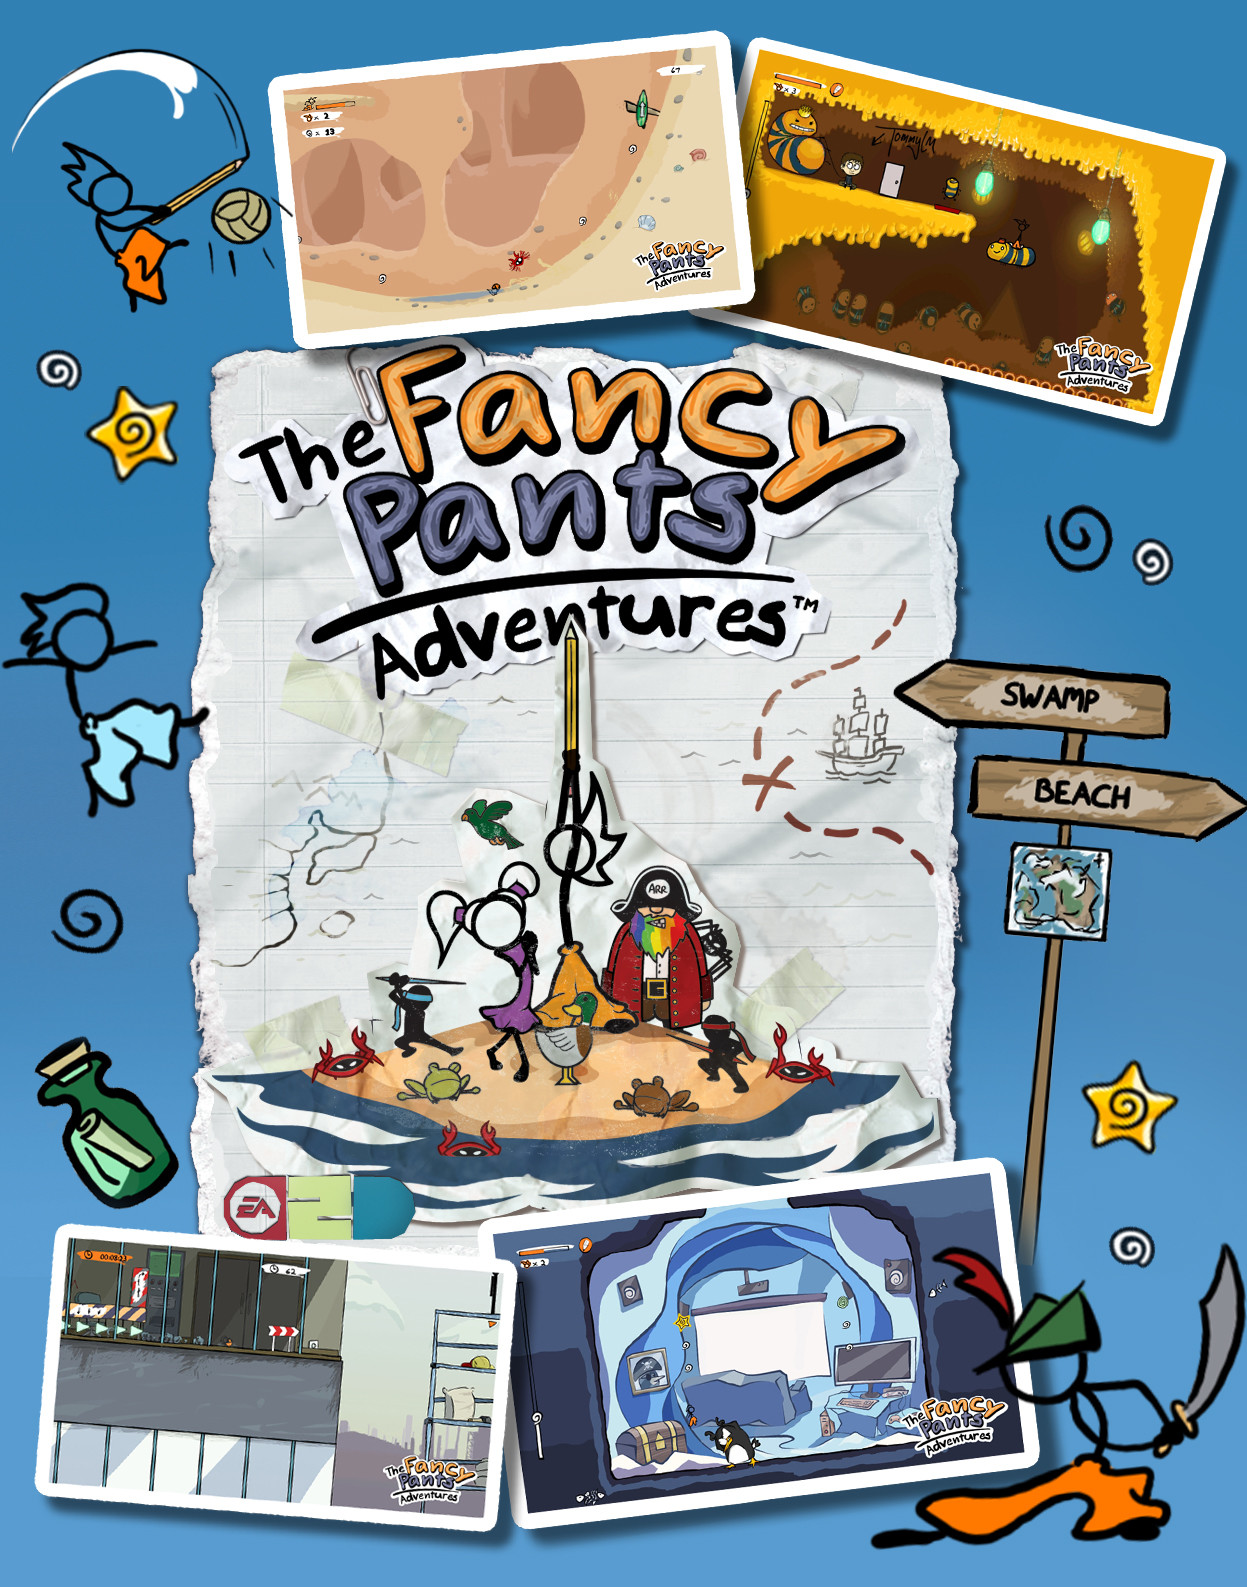 Play Fancy Pants Adventures World 2 game free online